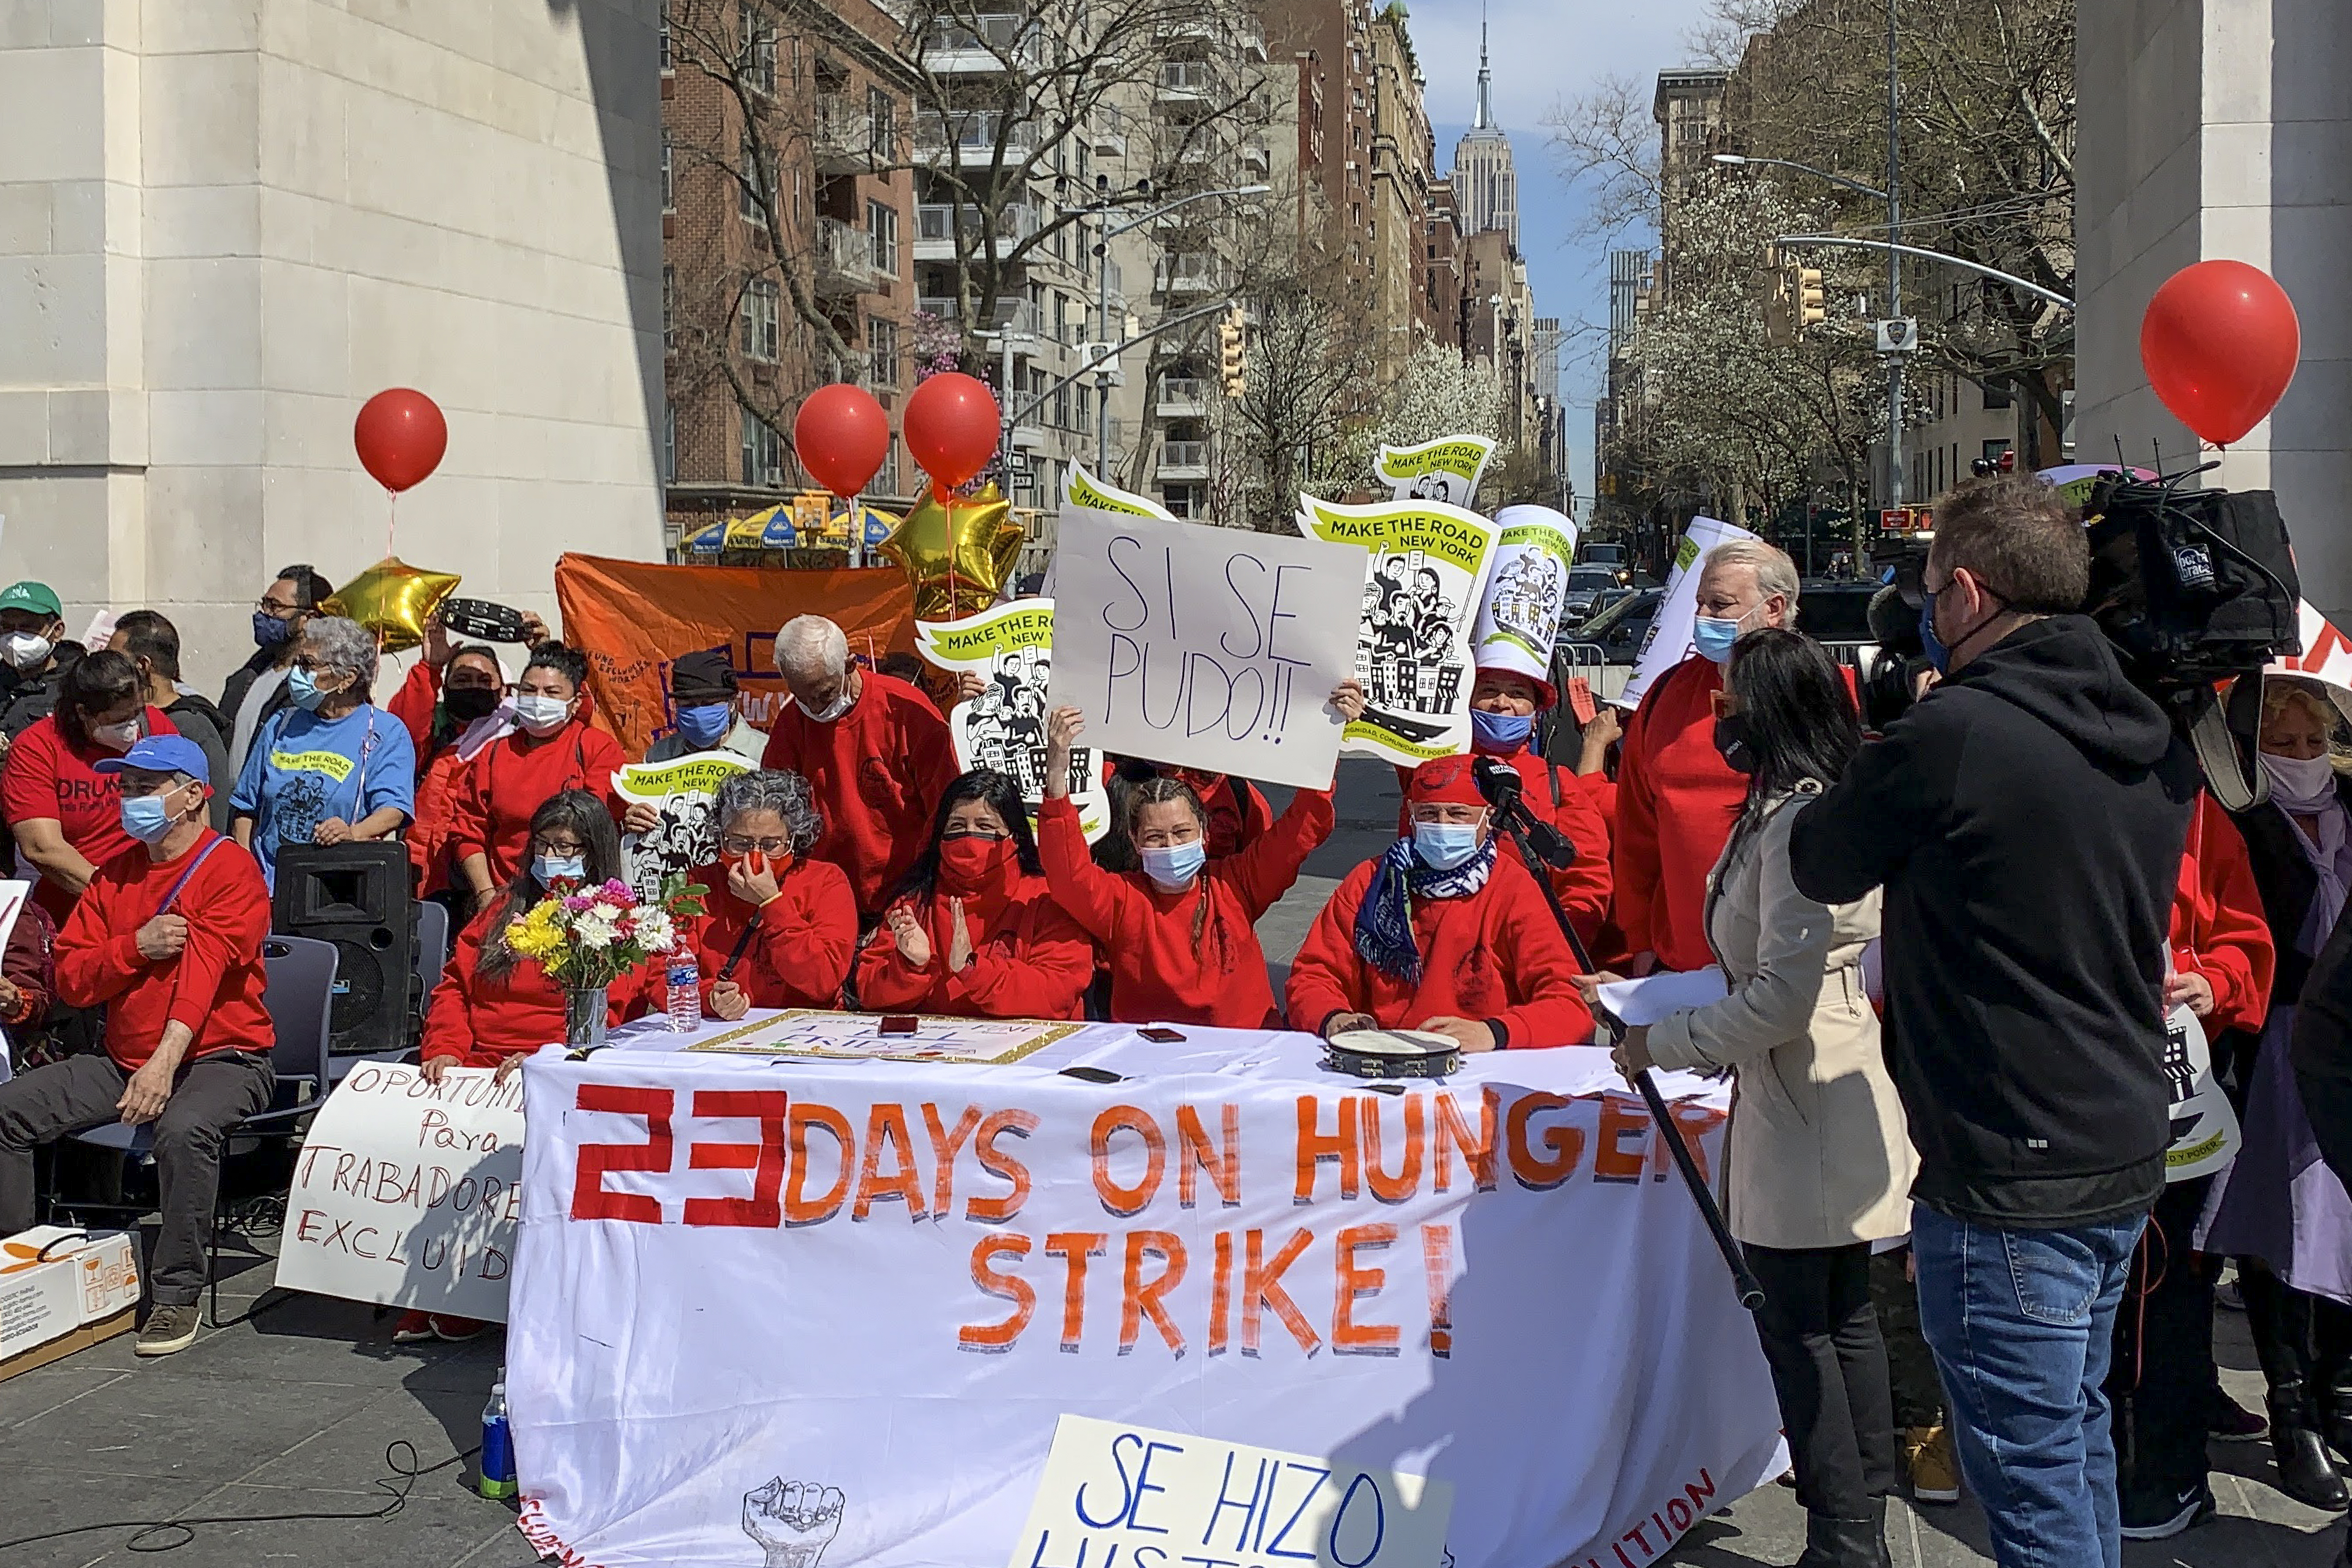 Essential workers end their 23-day long hunger strike in Washington Square Park and celebrate the passing of the $2.1 New York State Worker Fund. The fund will provide aid to undocumented workers excluded from federal pandemic assistance.